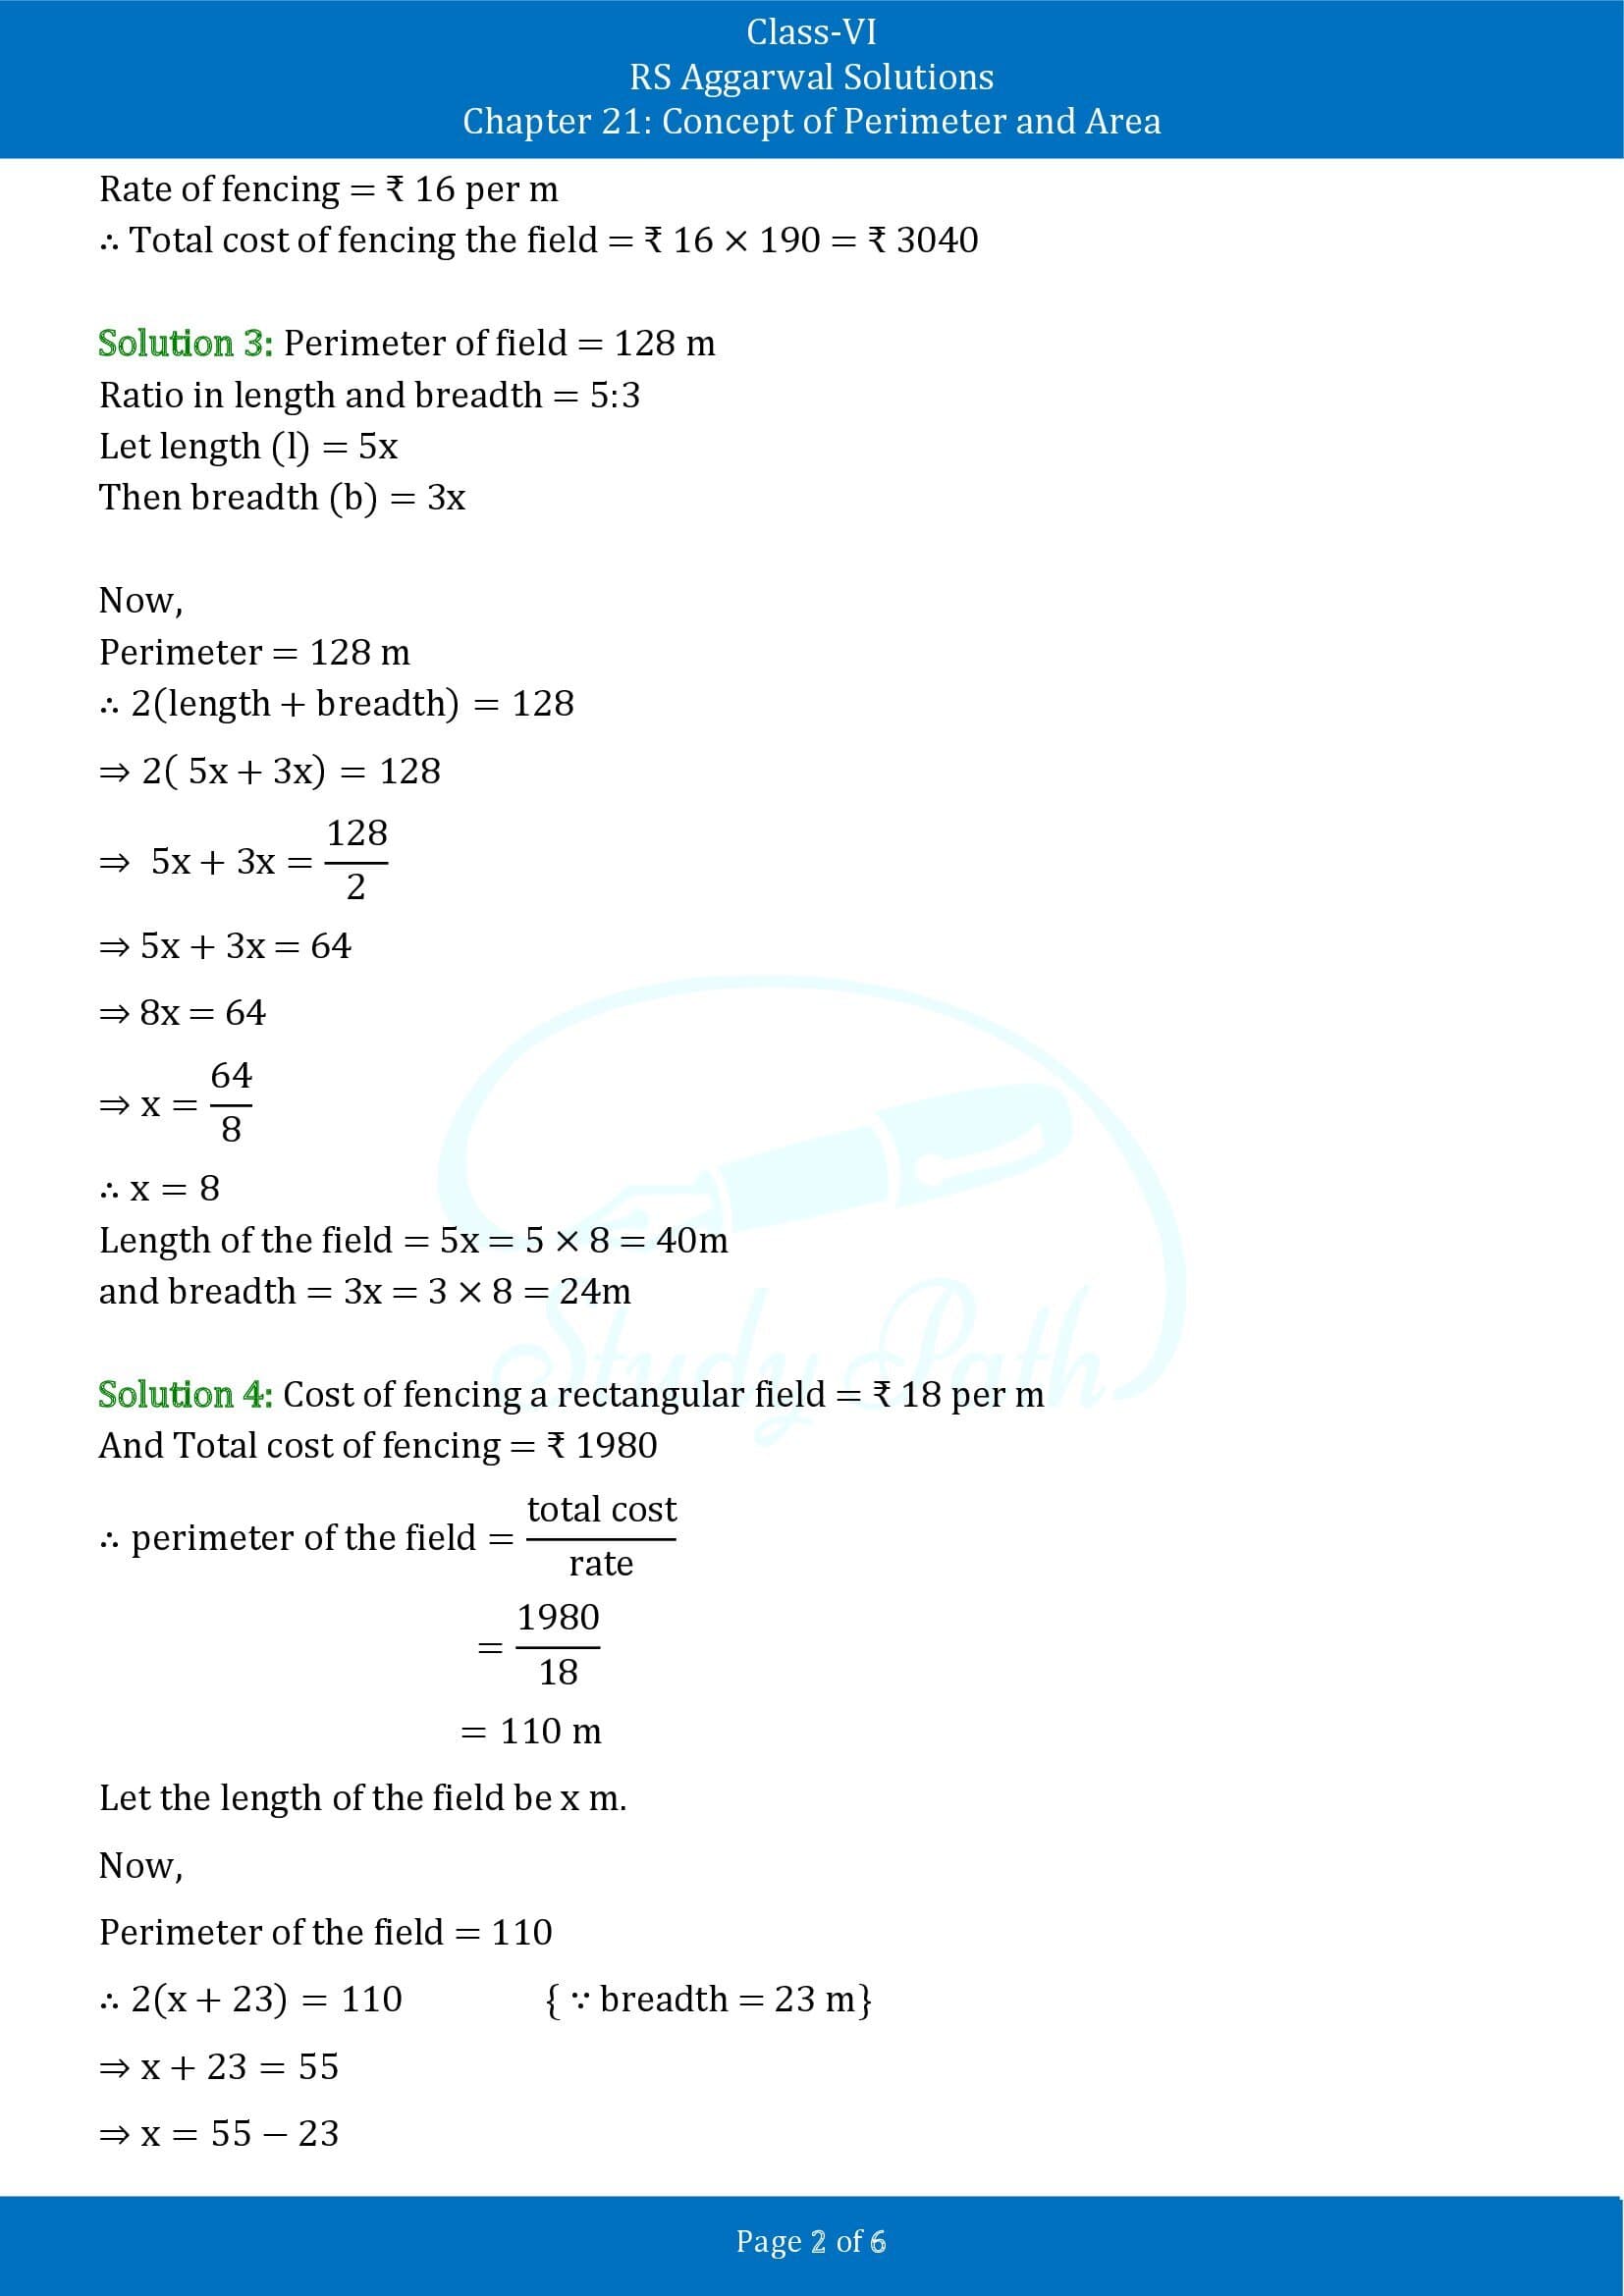 RS Aggarwal Solutions Class 6 Chapter 21 Concept of Perimeter and Area Exercise 21A 00002